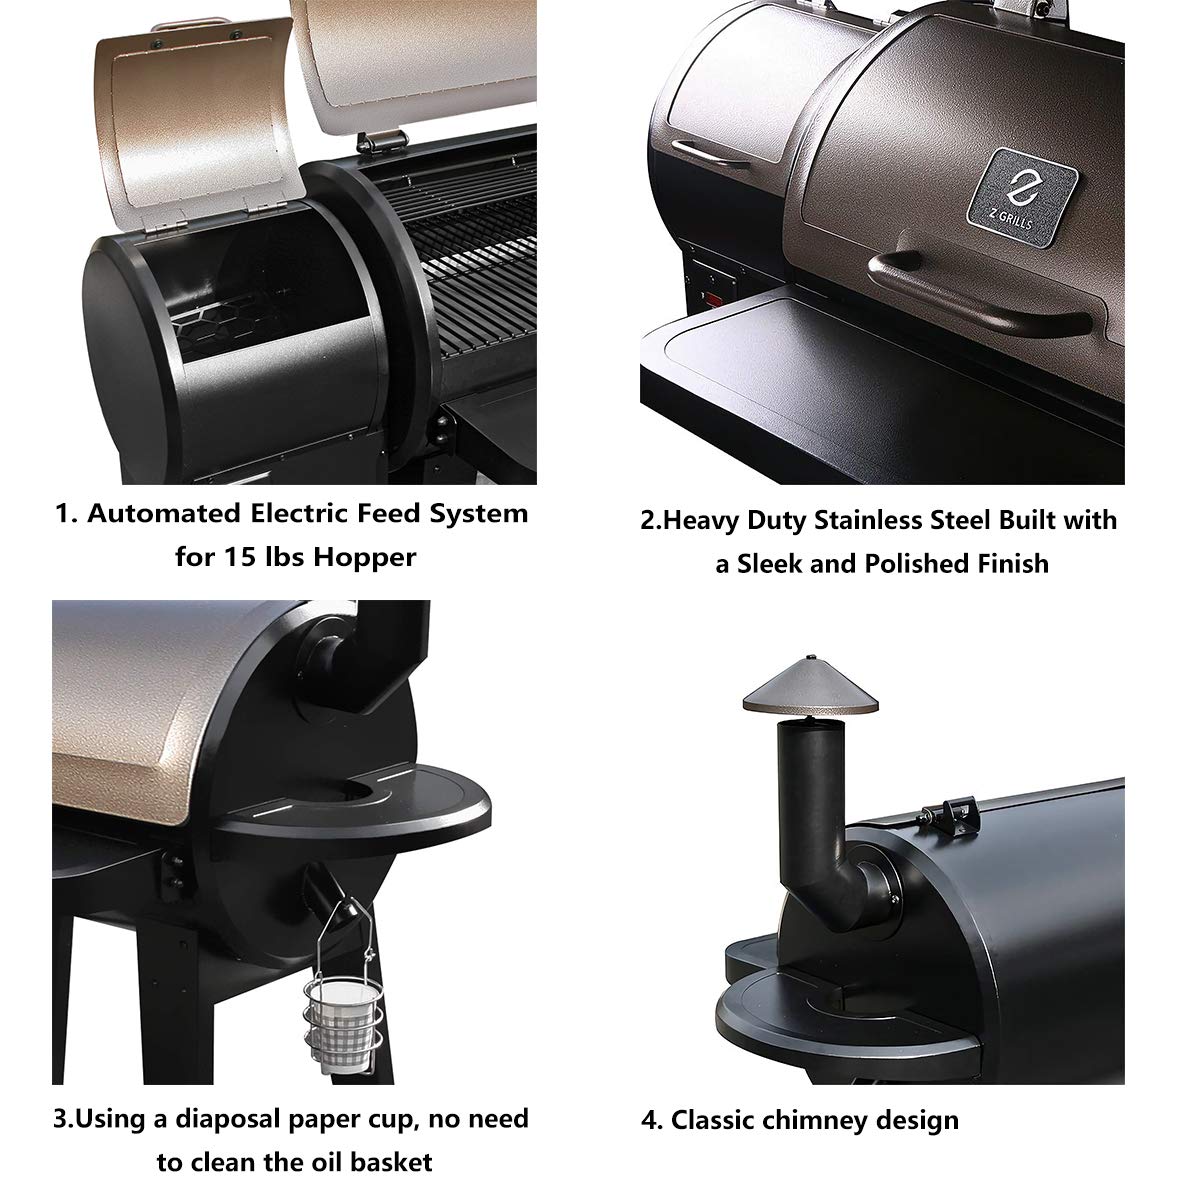 Z Grills ZPG-450A Upgrade Model Wood Pellet Grill & Smoker, 8 in 1 BBQ Grill Auto Temperature Control, 450 sq Inch Deal, Bronze & Black Cover Included - image 4 of 11